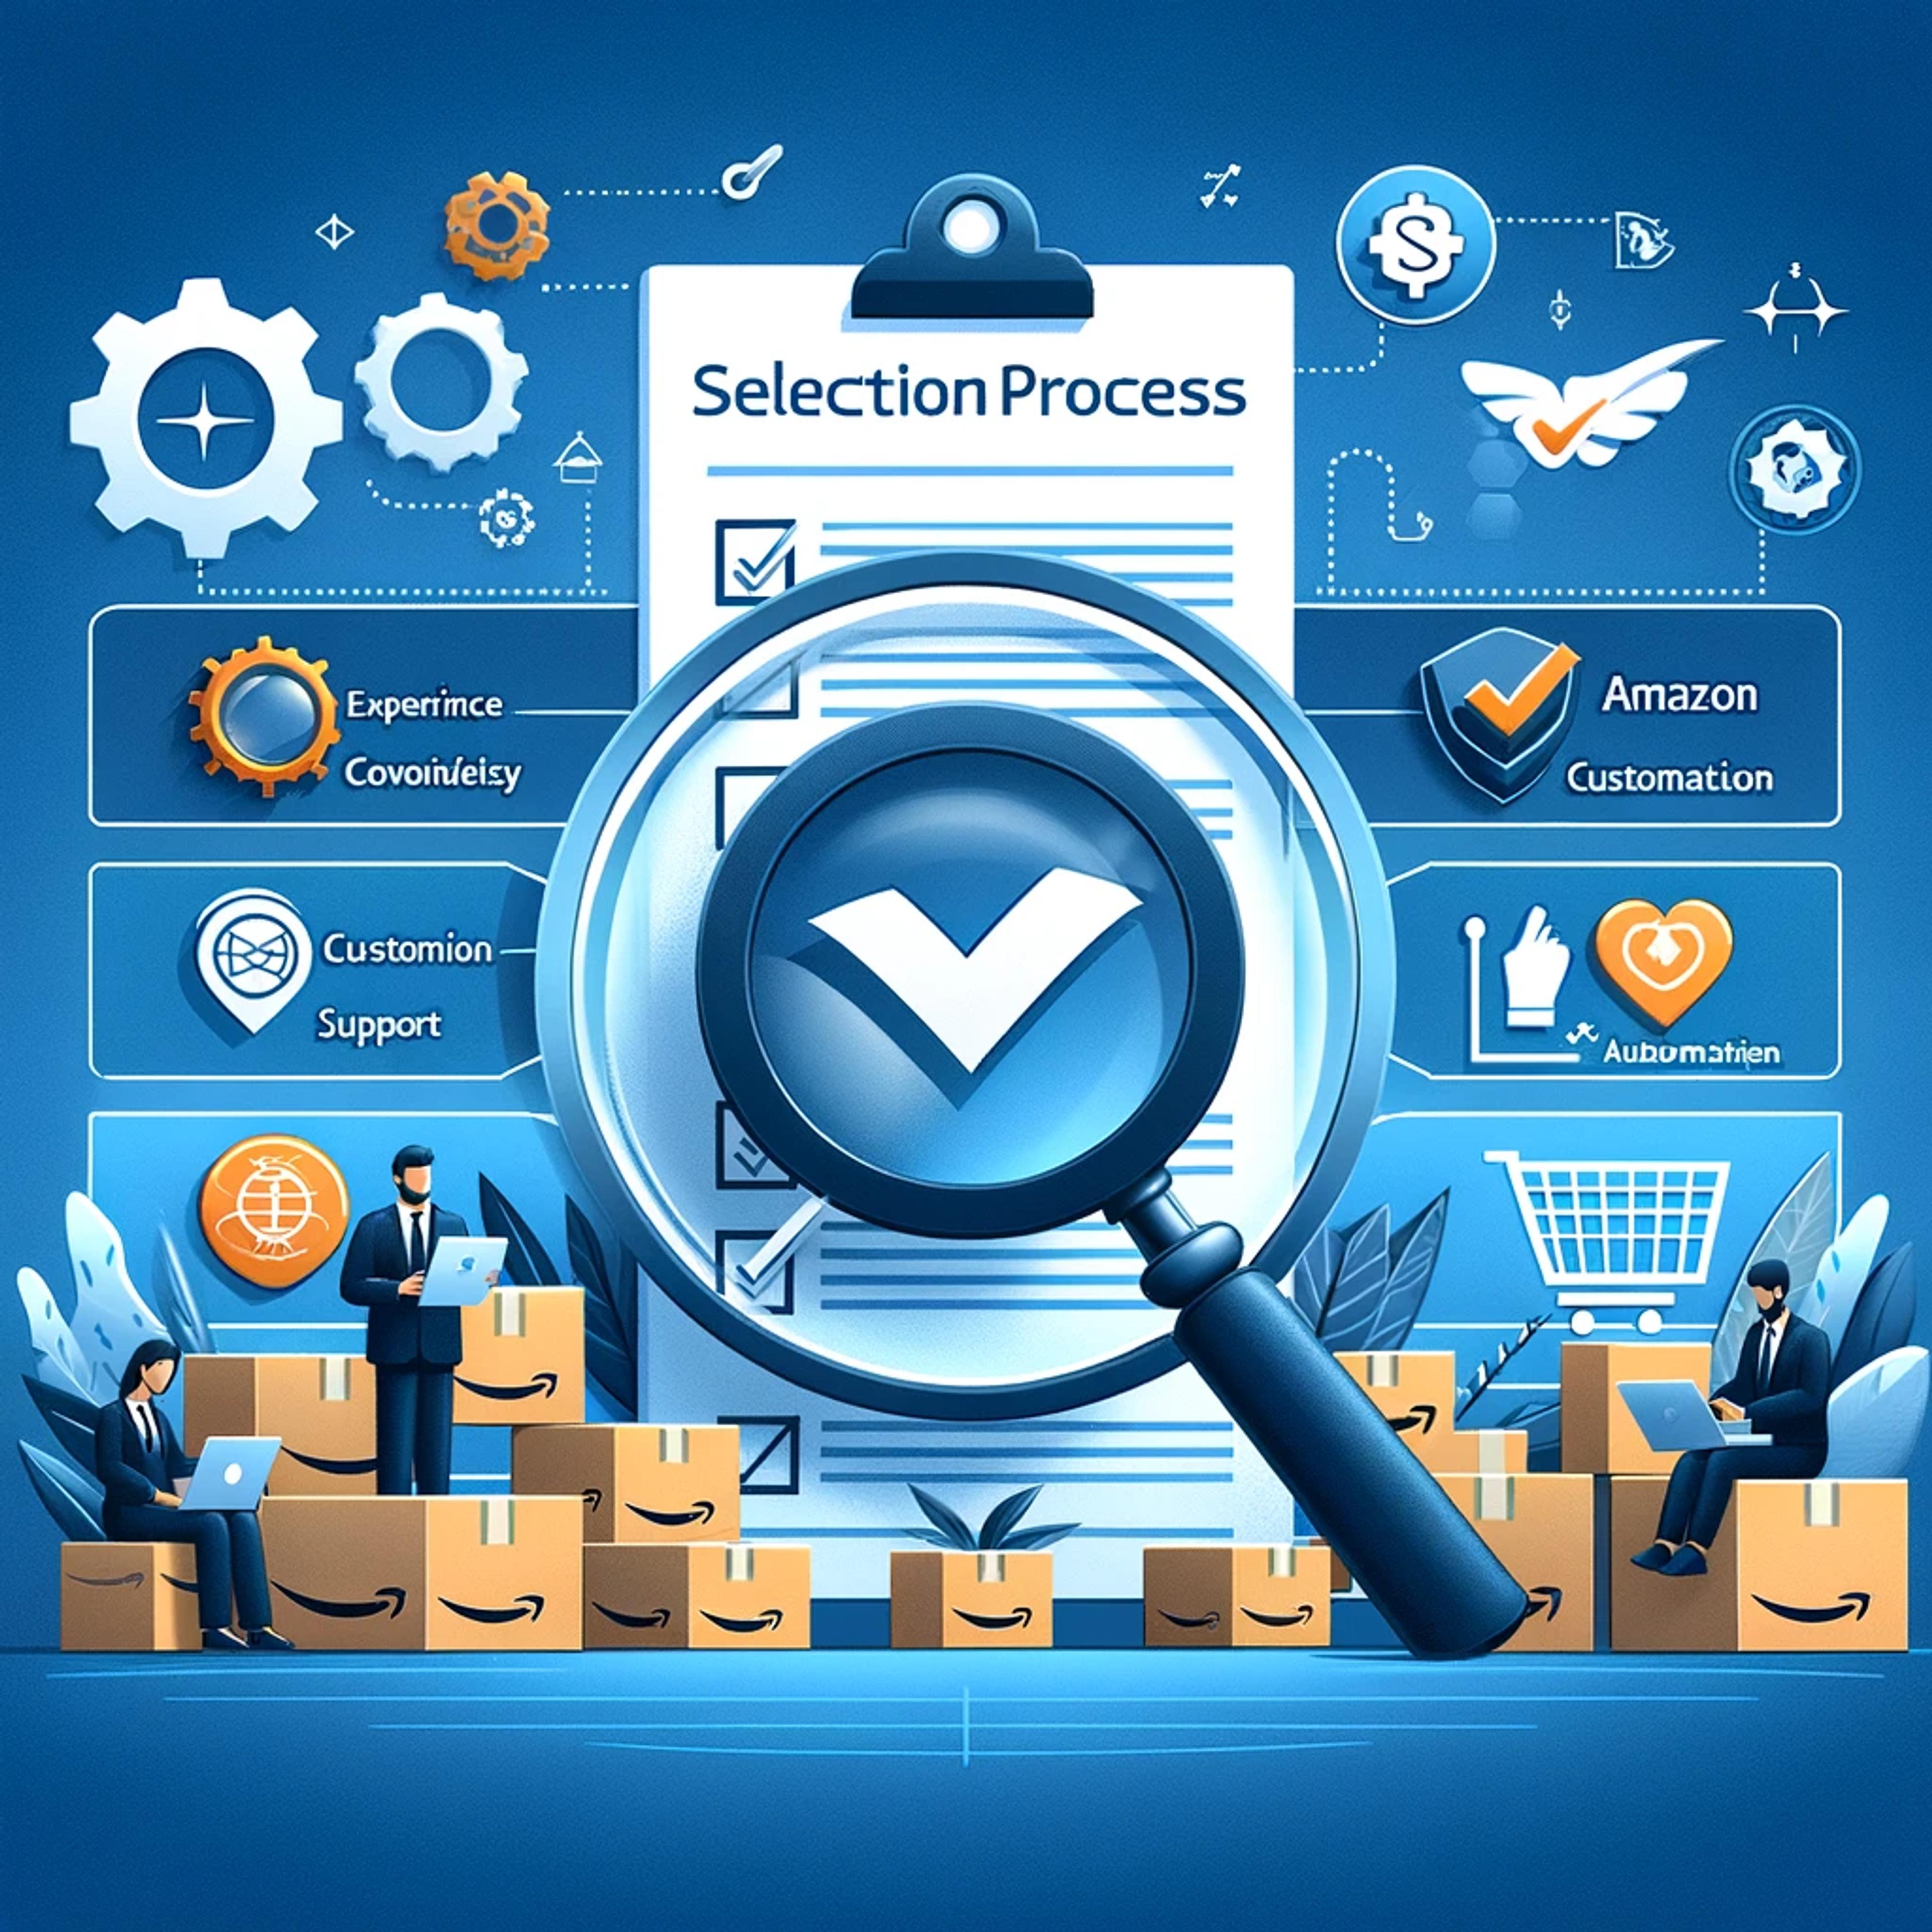 Illustration of a product selection process on Amazon